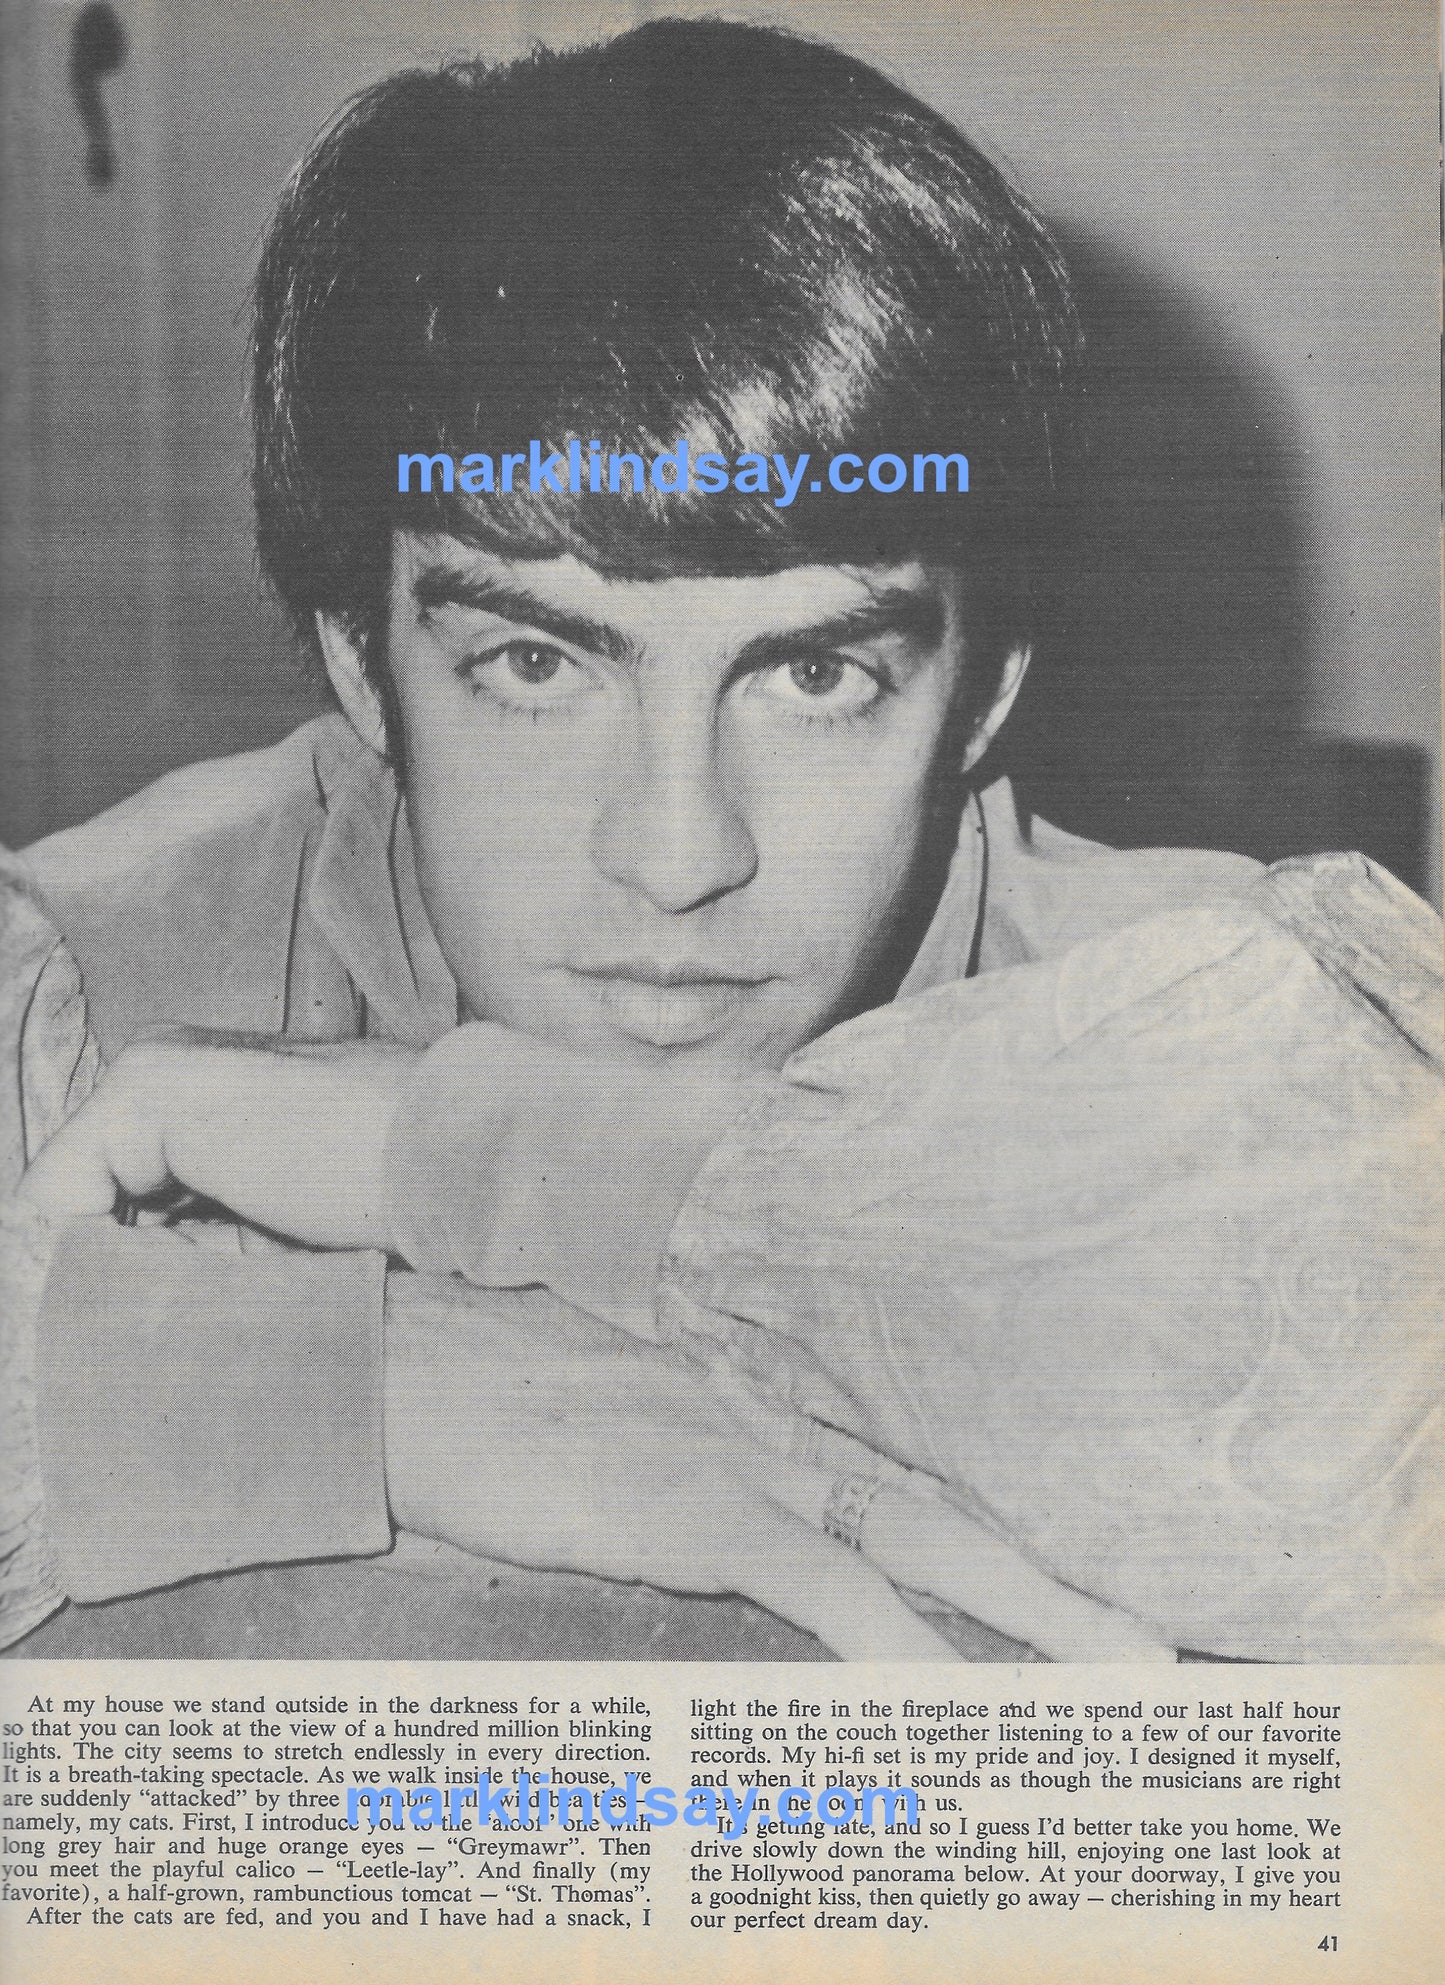 March 1967 16 Magazine - Personally Autographed to YOU by Mark